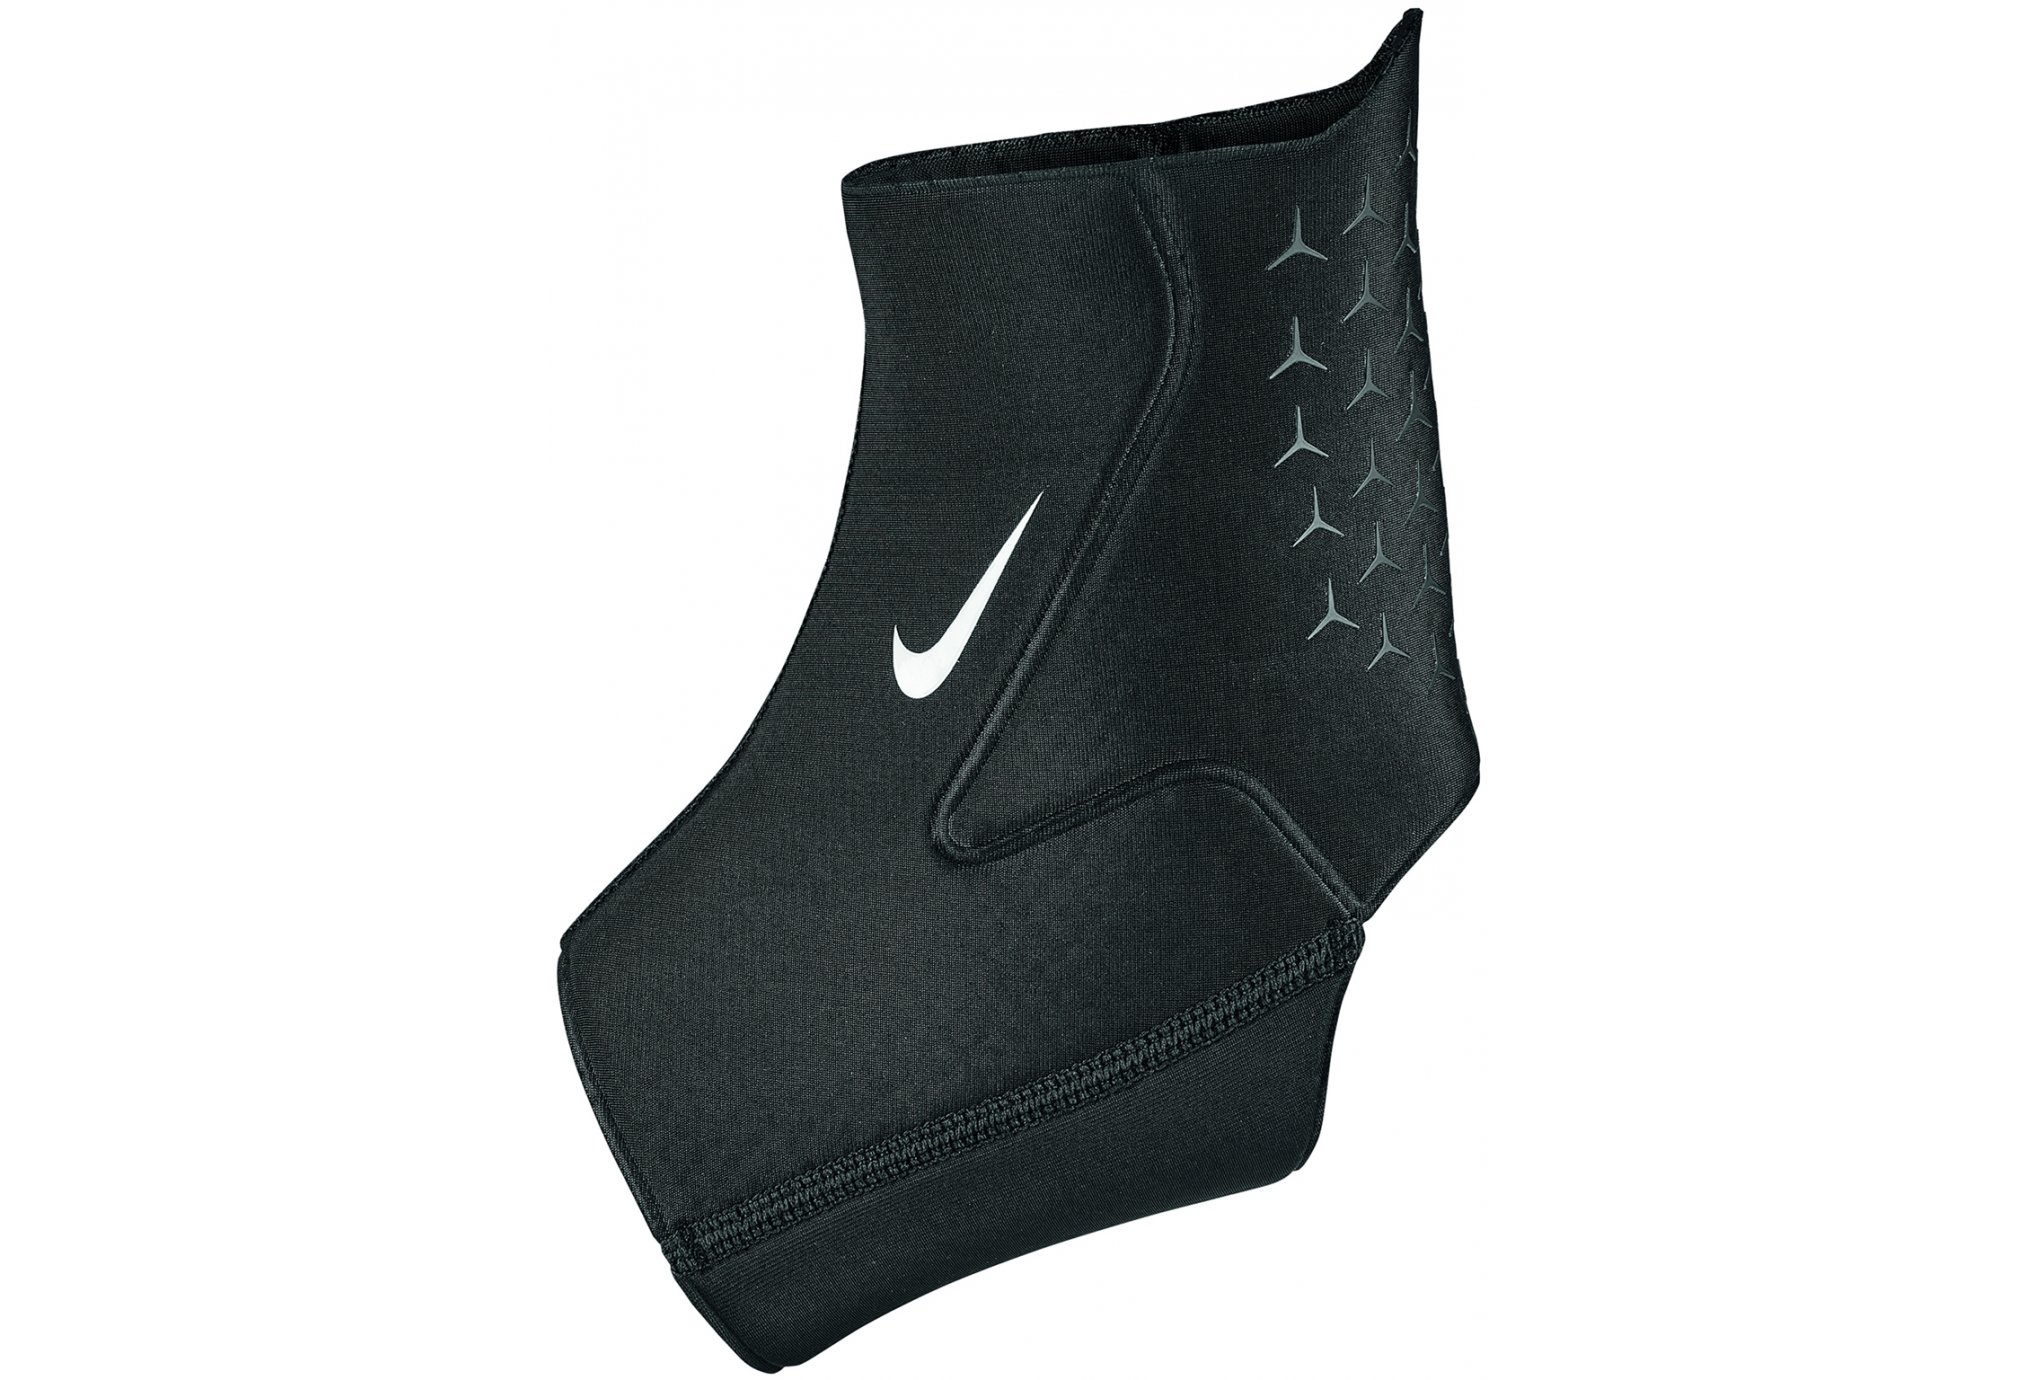 Nike Pro Ankle Sleeve 3.0 Protection musculaire & articulaire